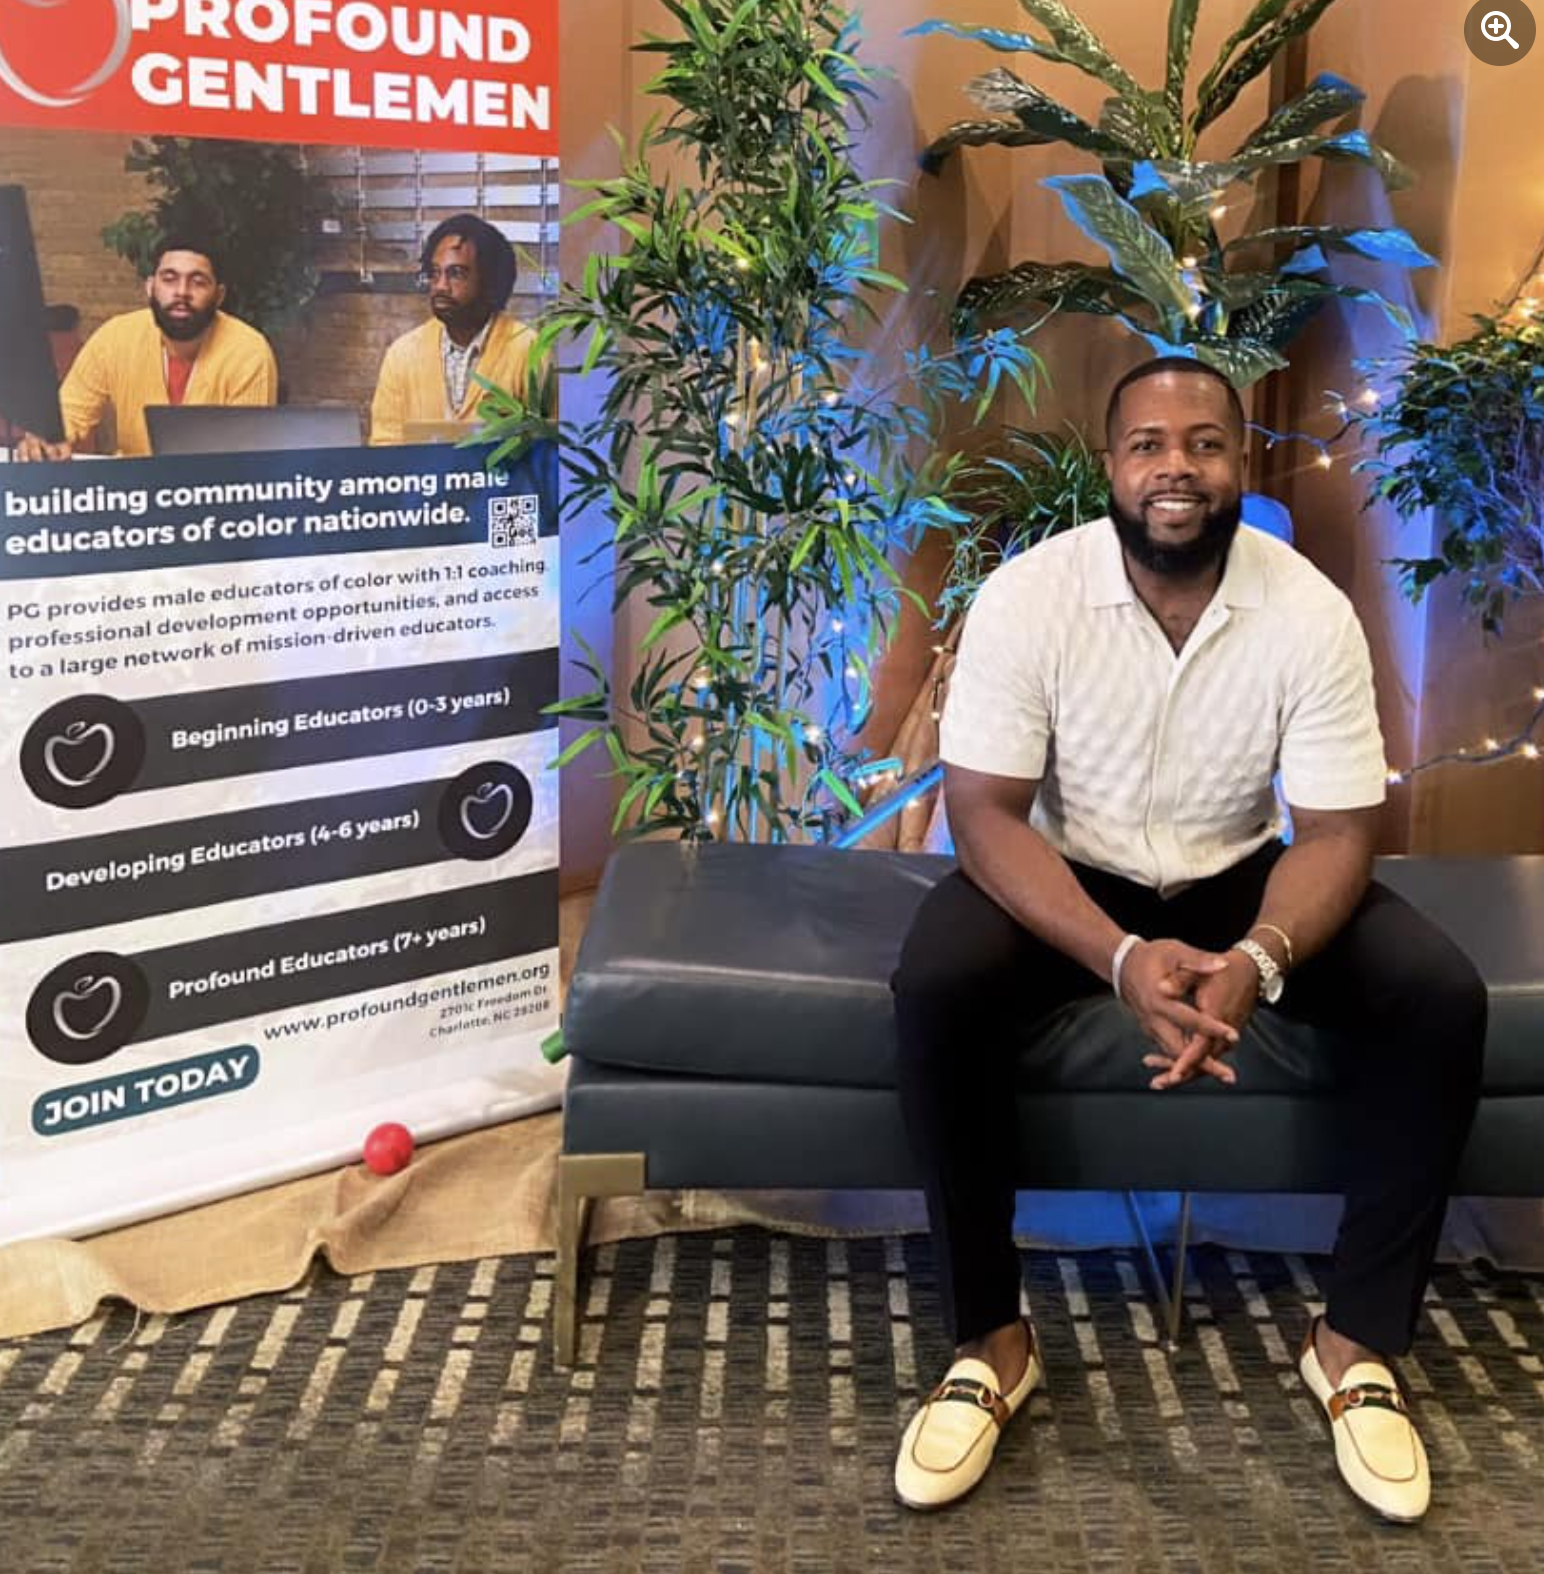 Photo shows Principal Brian Riddick sitting on a bench next to the sign about "Profound Gentlemen", a program for building community among male educators of color nationwide. He is smiling at the camera.